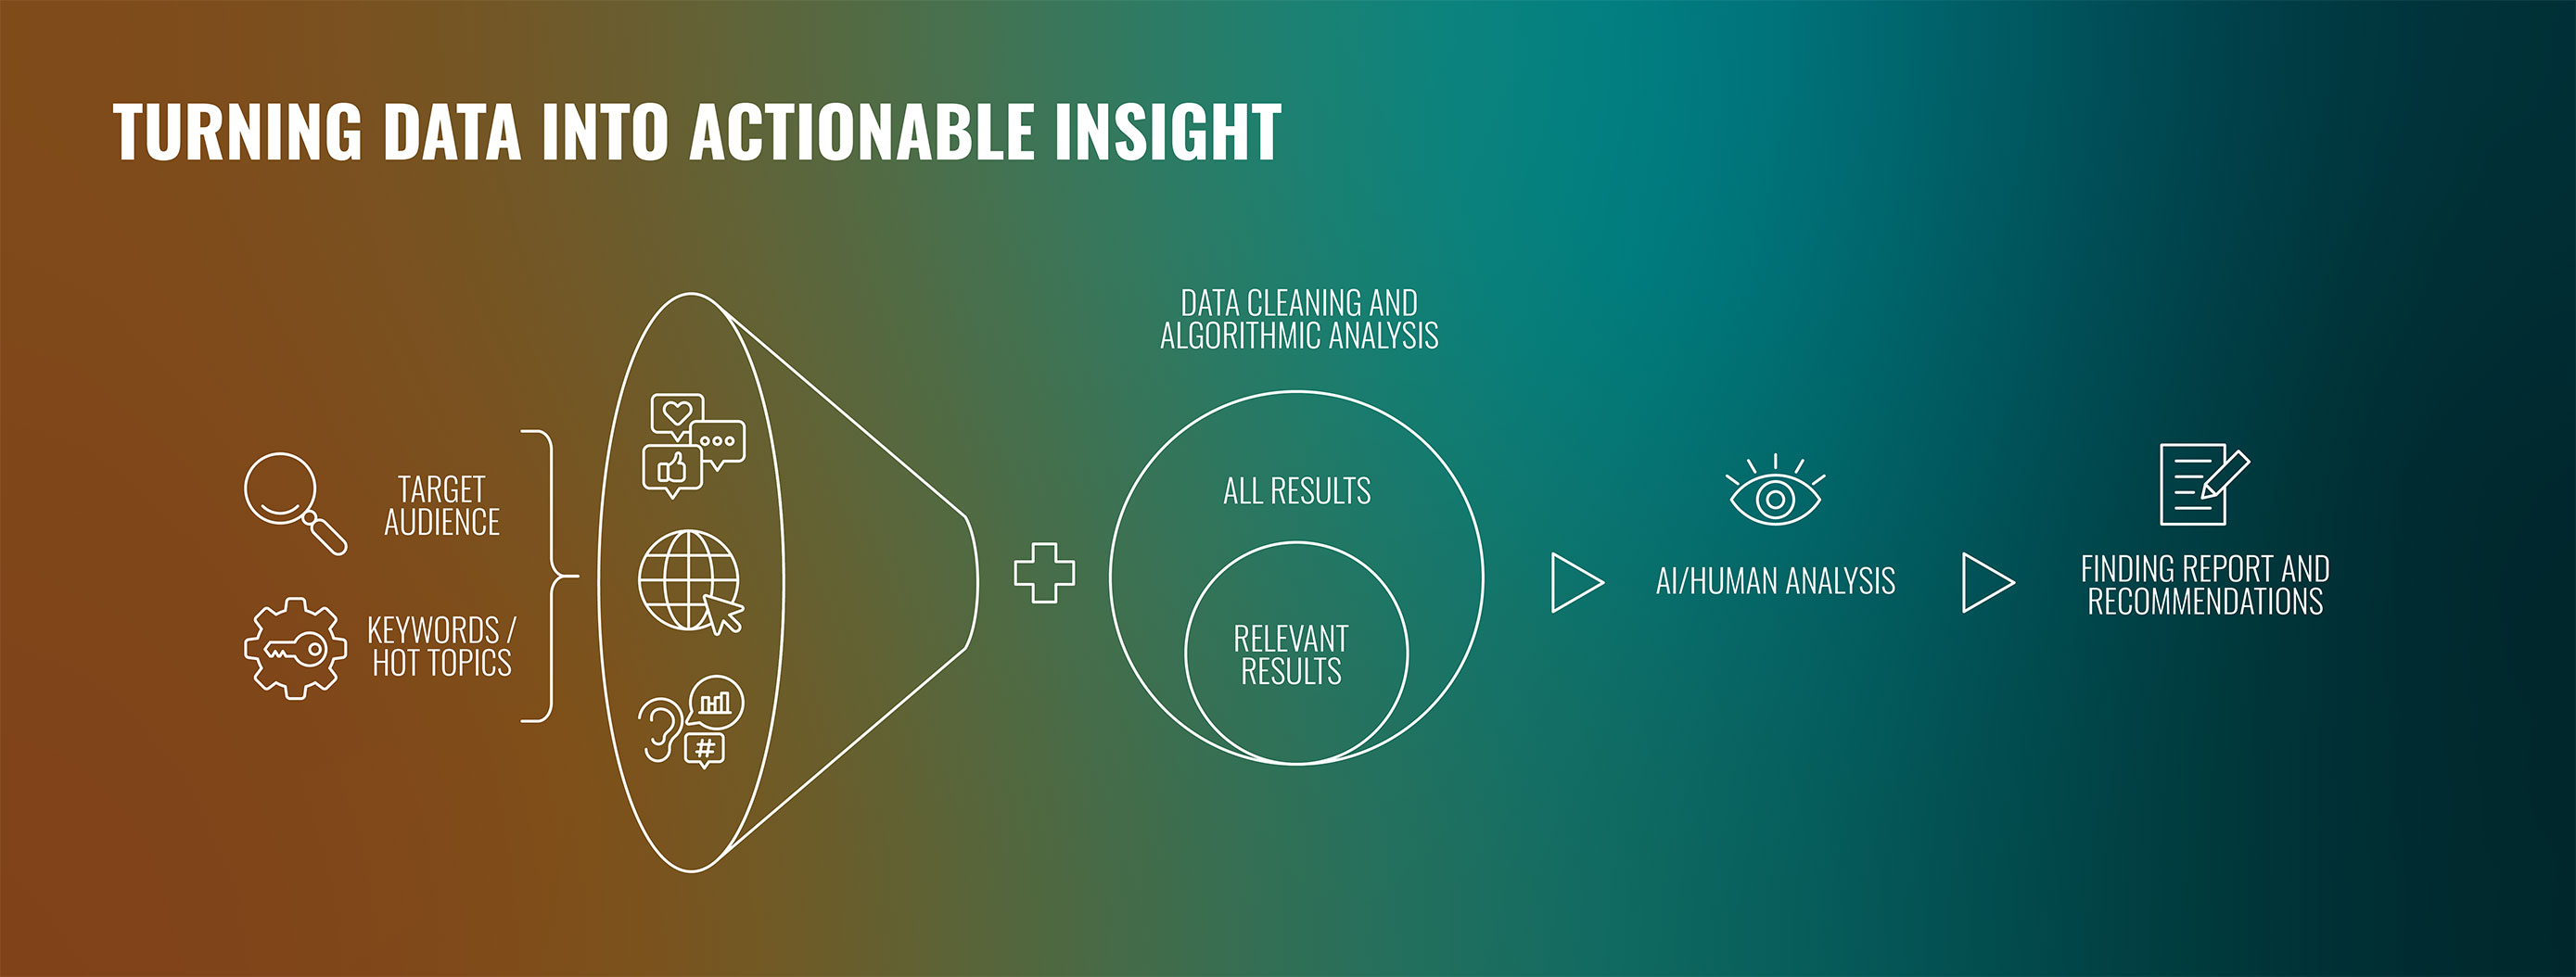 Turning Data Into Actionable Insights